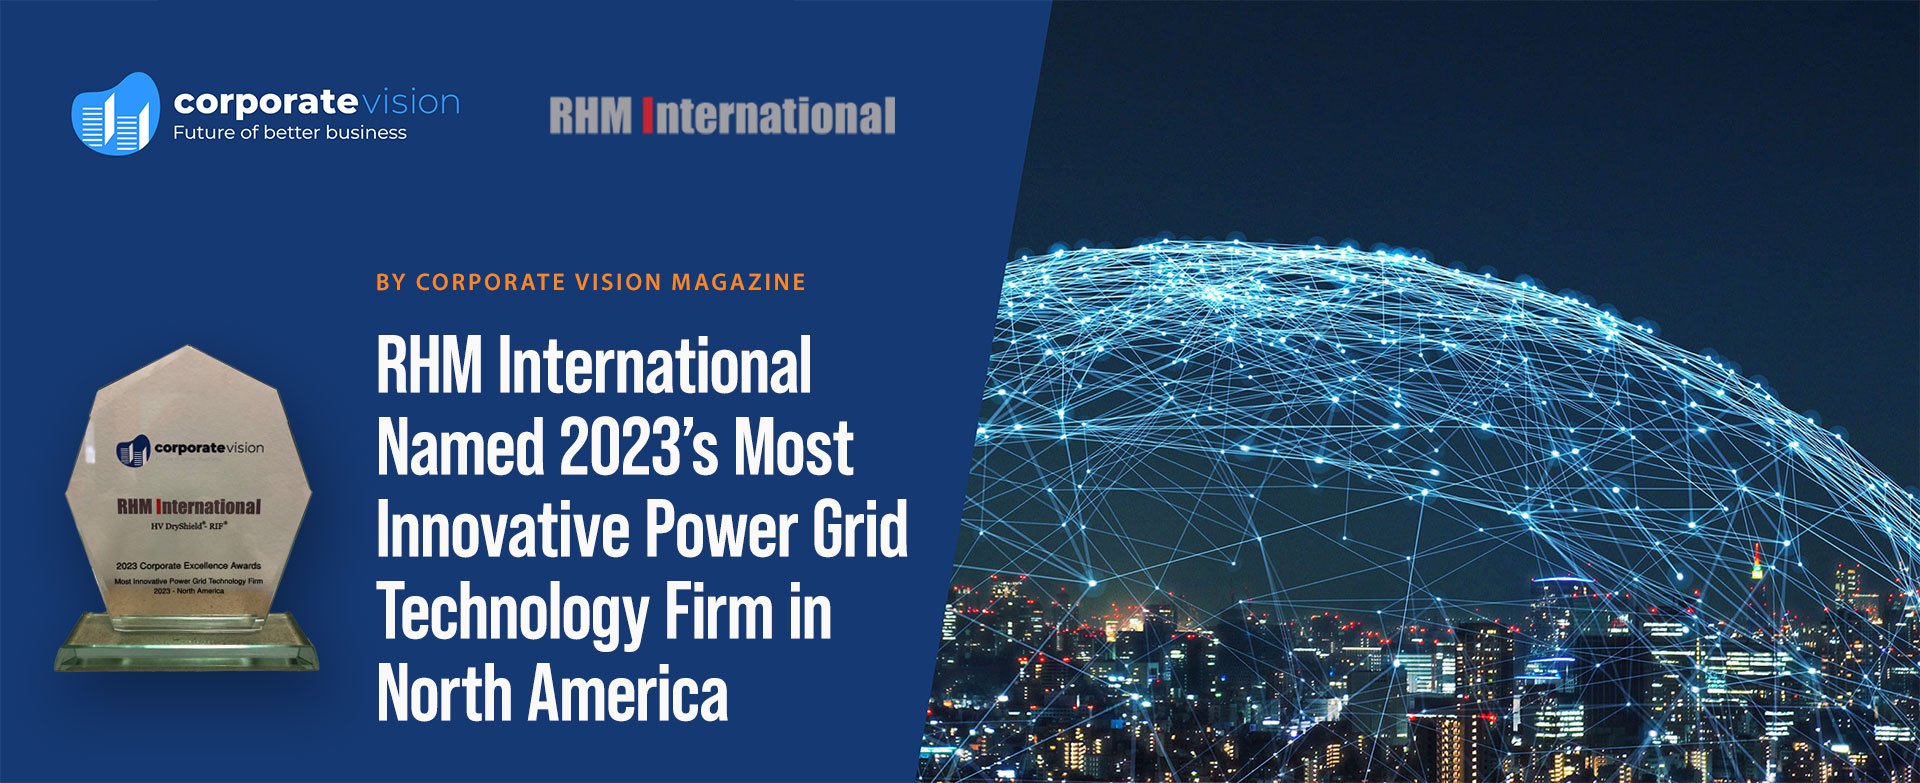 RHM International Named 2023’s Most Innovative Power Grid Technology Firm by Corporate Vision Magazine